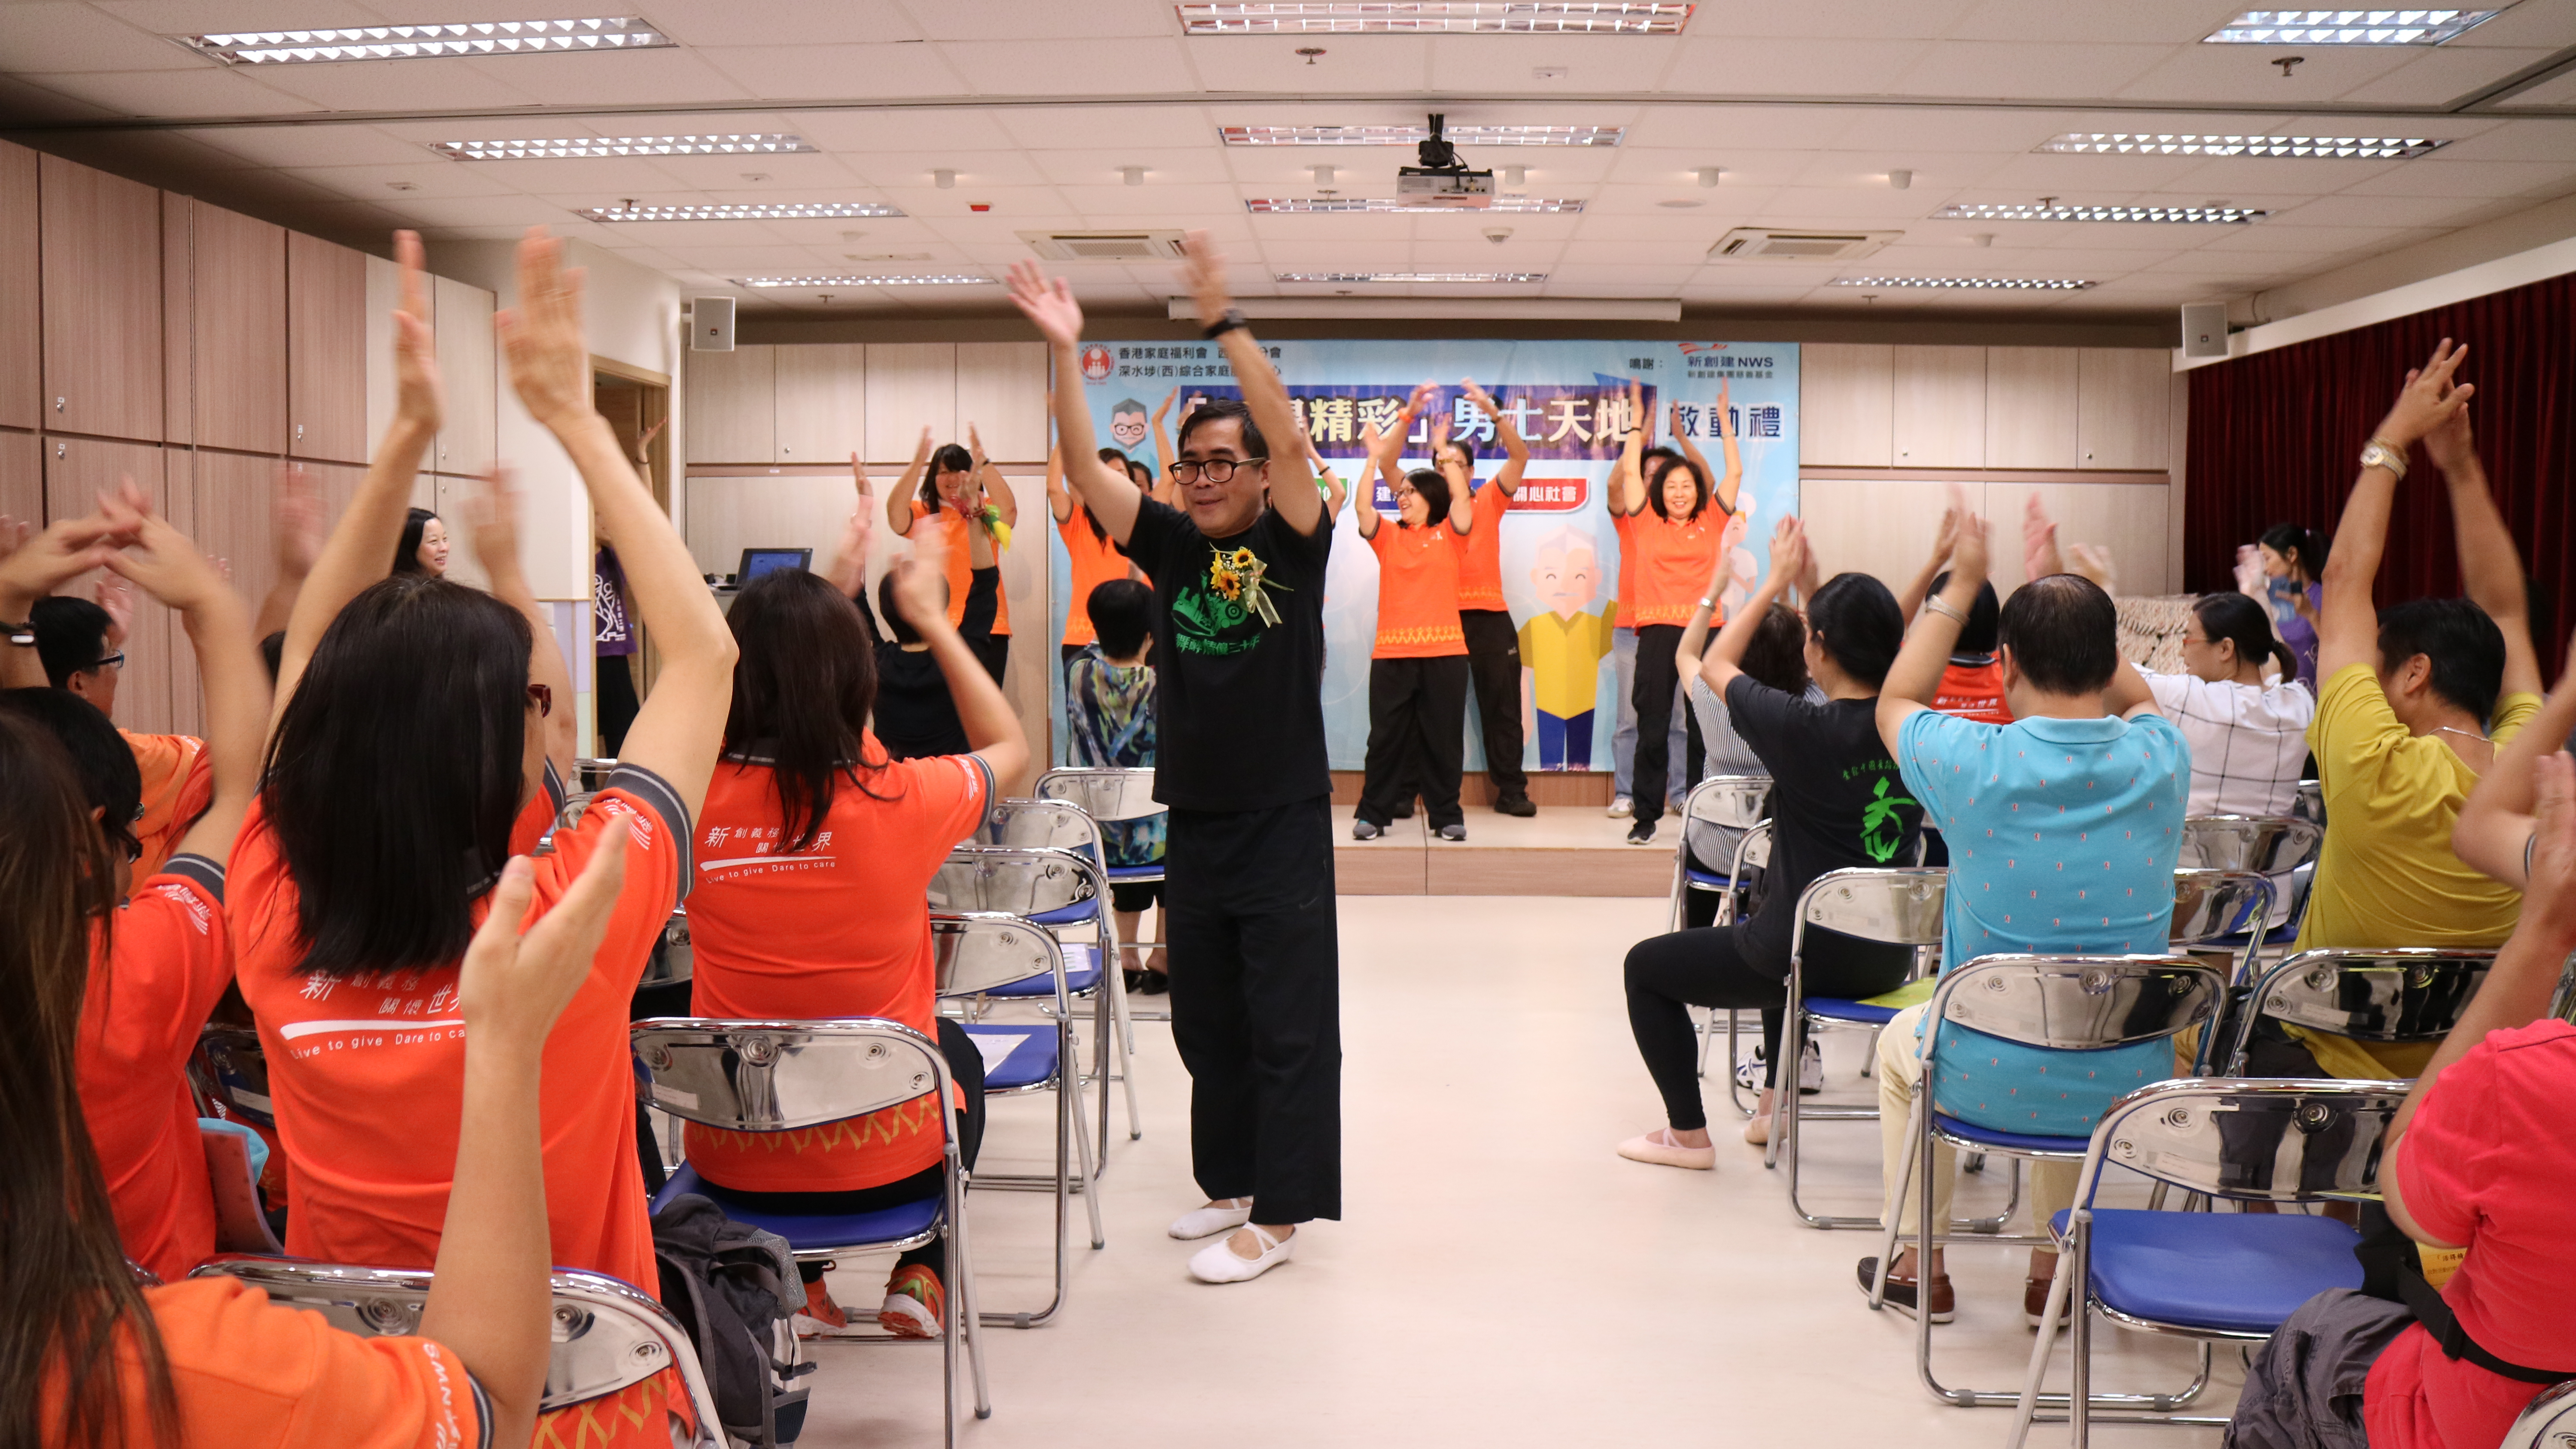 NWS Holdings’ new community programme helps Sham Shui Po men help themselves and others